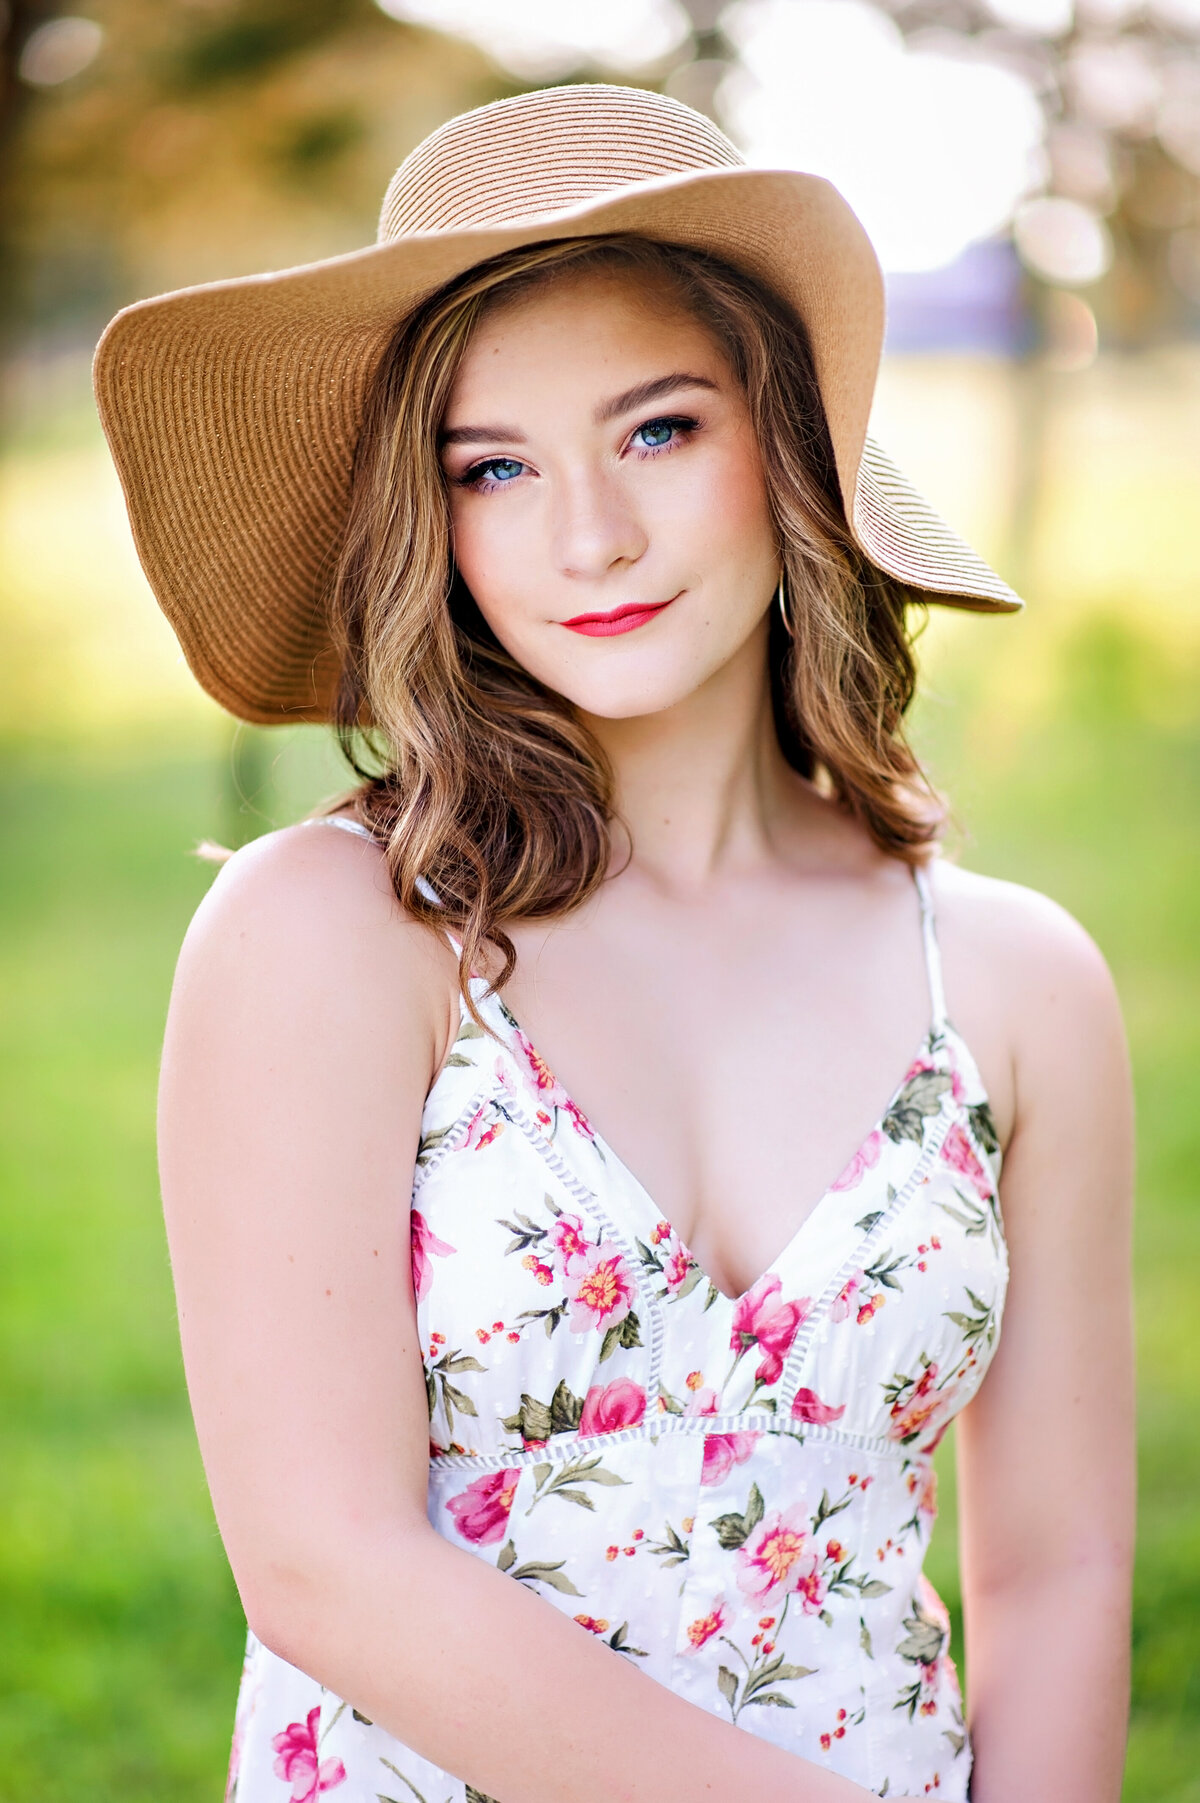 High school senior girl wearing large floppy hat and floral dress poses for her Richmond, VA senior portraits.